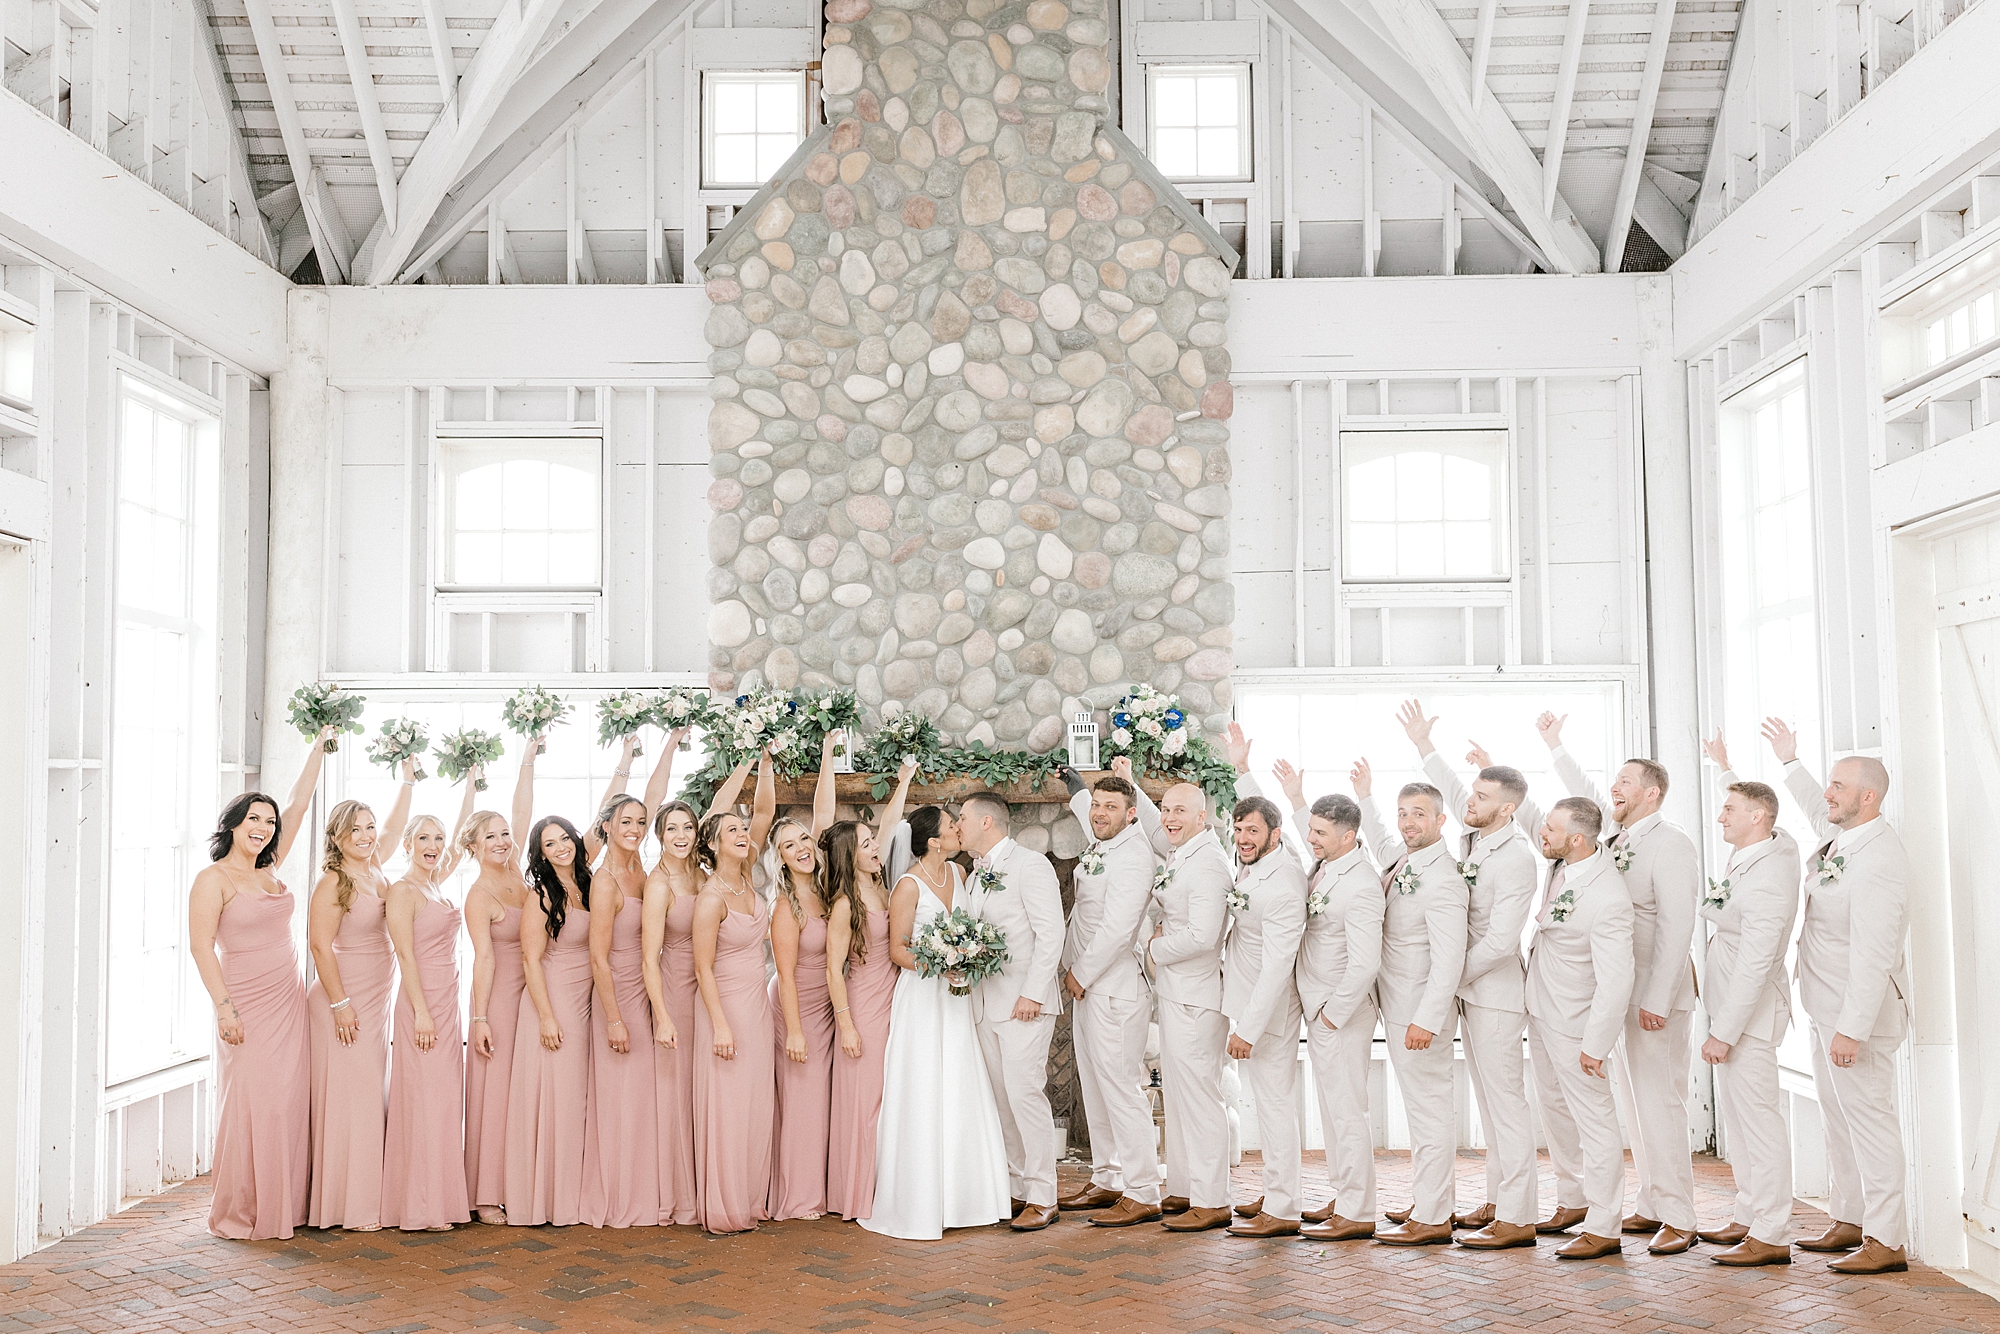 bride and groom pose with wedding party in dusty pink gowns and tusk suits